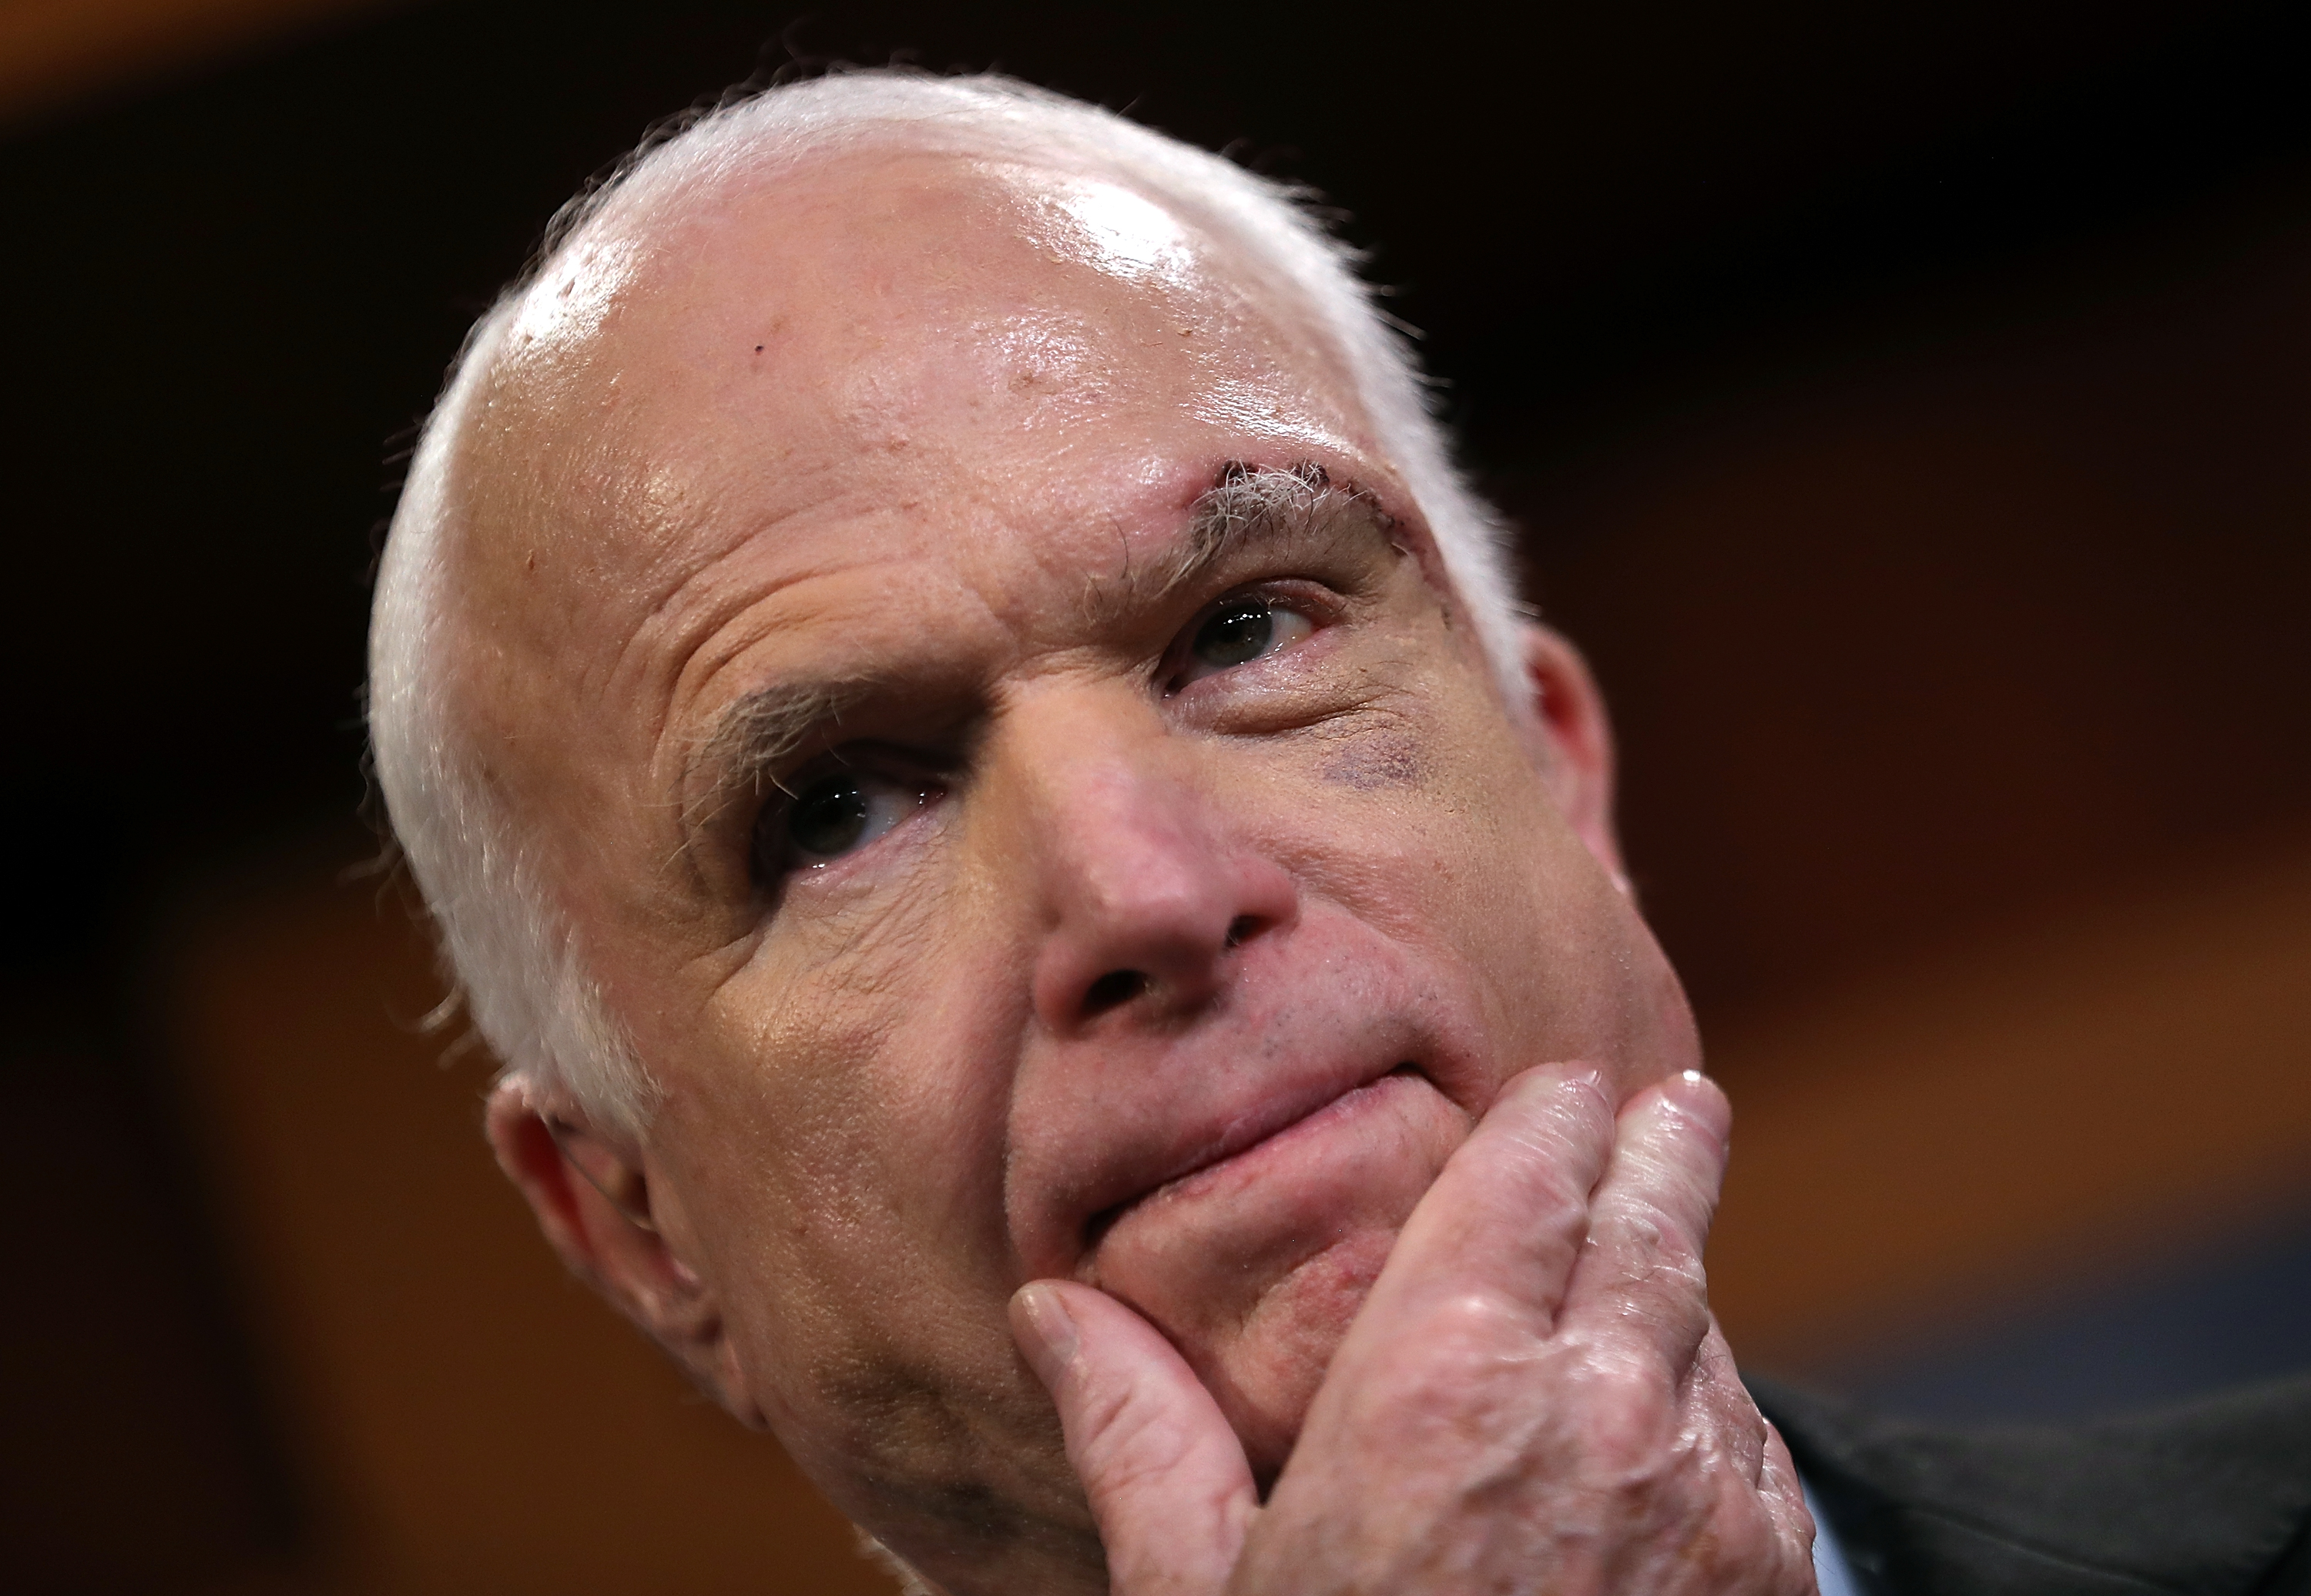 U.S. Sen. John McCain (R-AZ) looks on during a news conference to announce opposition to the so-called skinny repeal of Obamacare at the U.S. Capitol July 27, 2017 in Washington, DC. (Justin Sullivan—Getty Images)